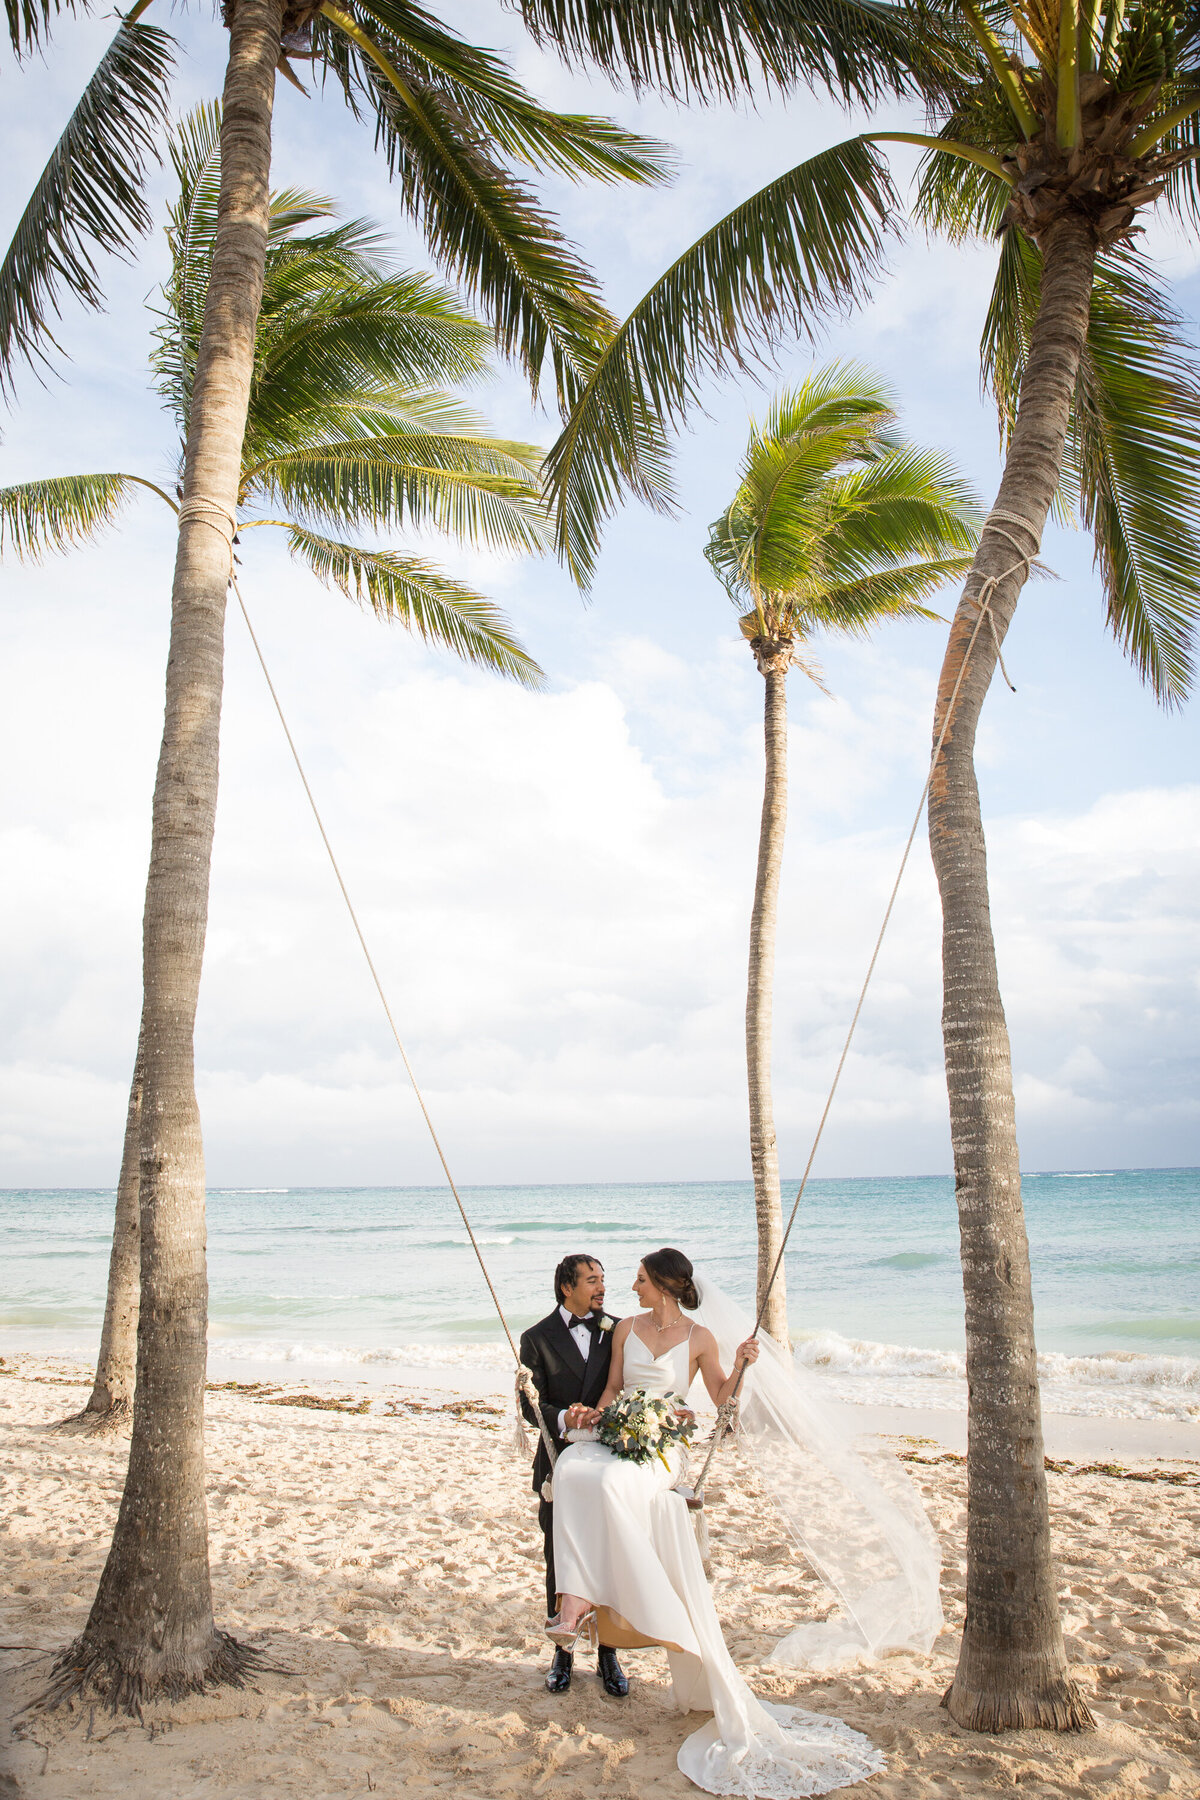 Austin wedding photographer captures a stunning moment of a bride and groom playfully swinging on a swing on the beach.